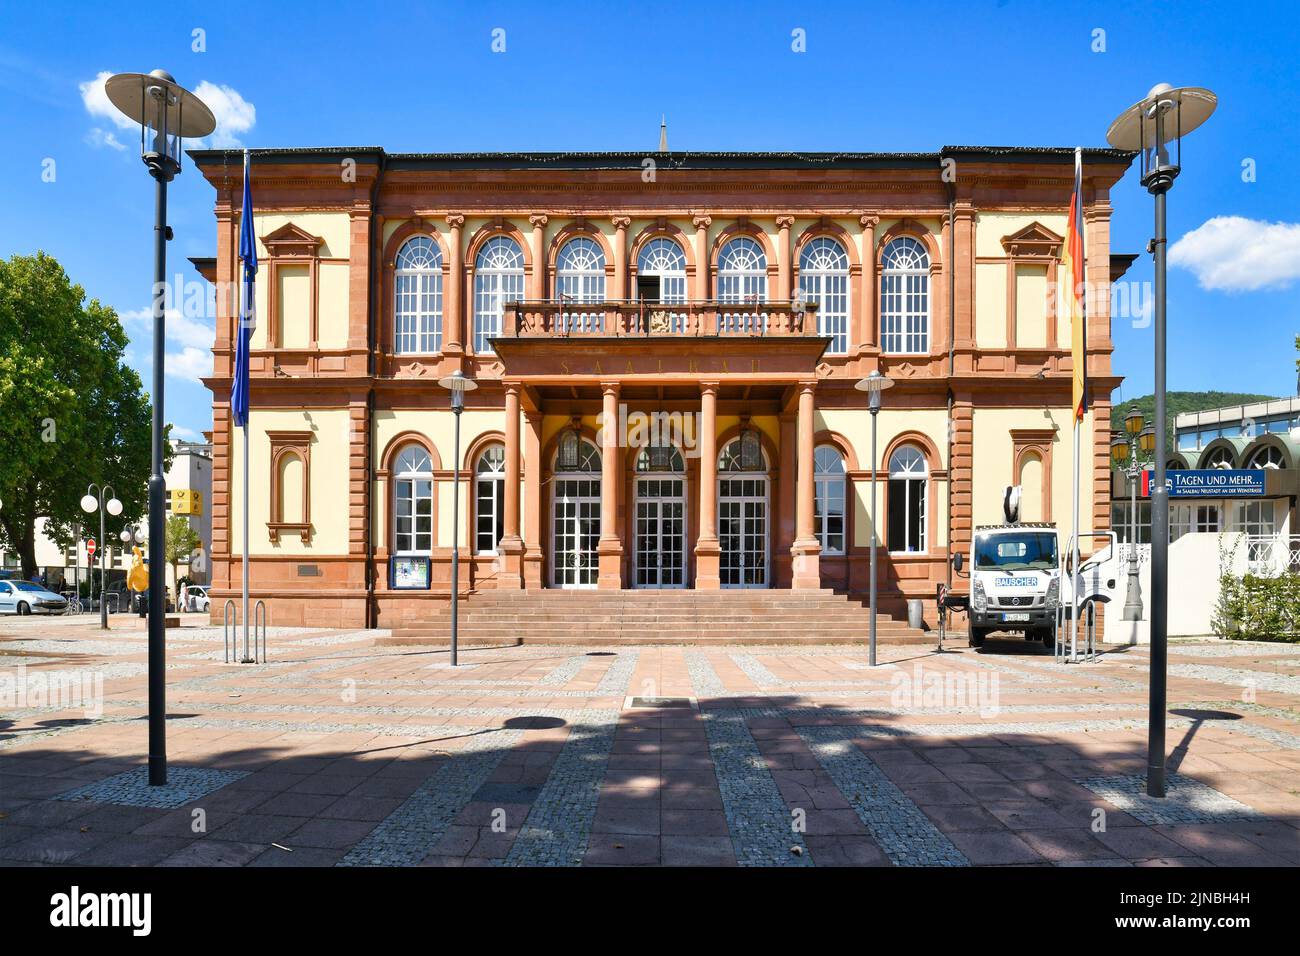 Neustadt an der Weinstrasse, Germany - August 2022: Saalbau, a multifunctional event and congress center used for cultural events Stock Photo